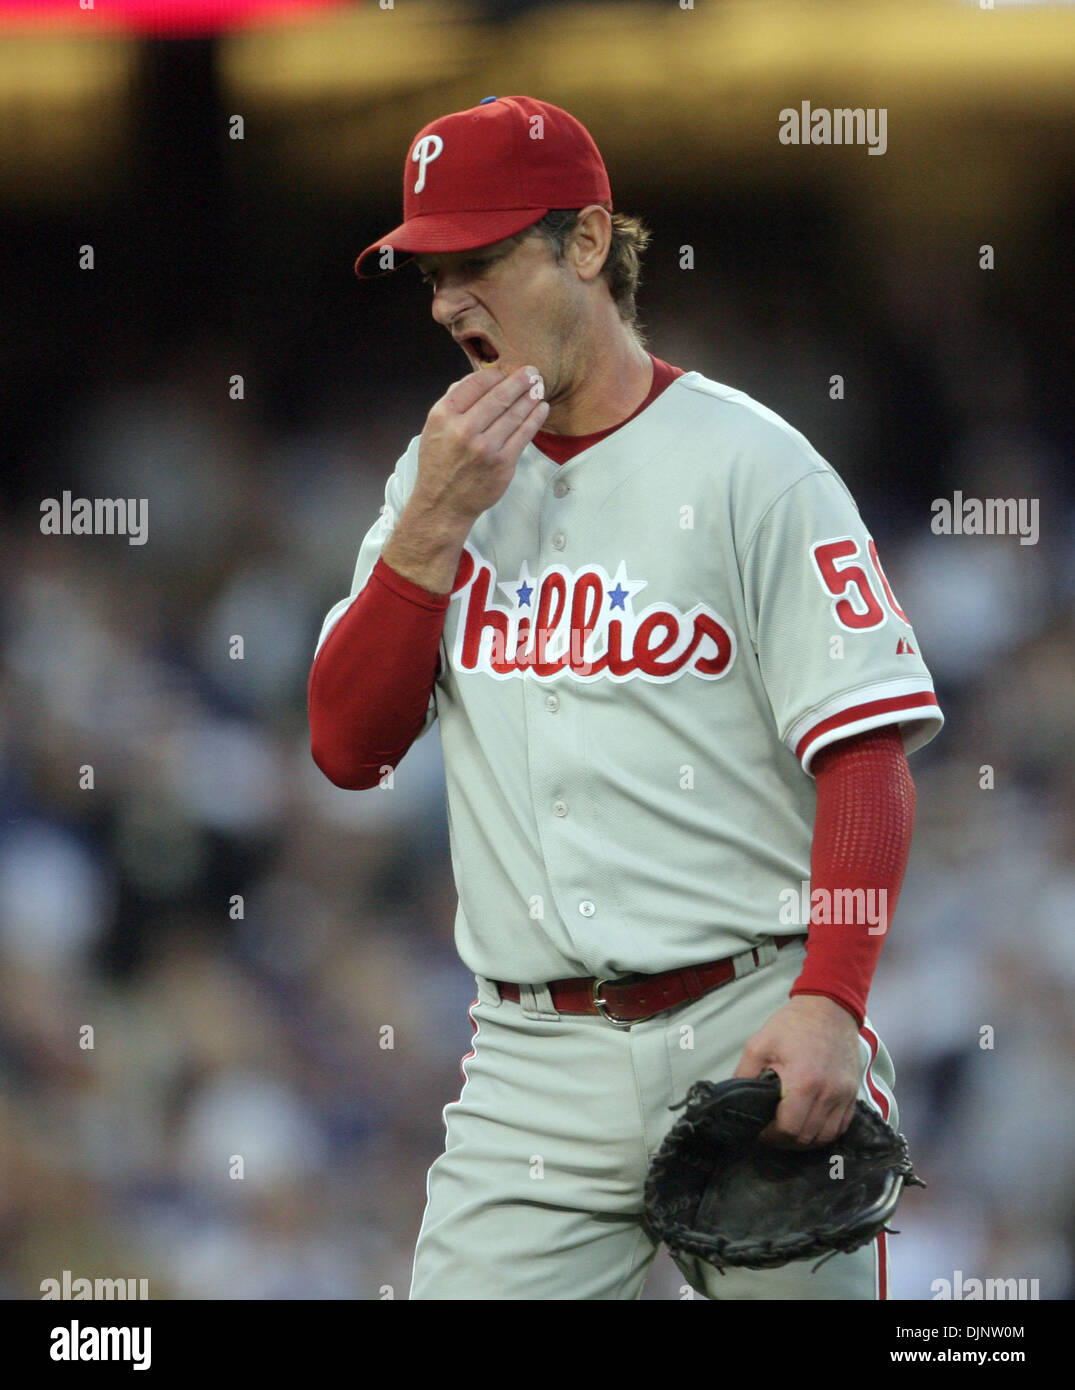 1,686 Jamie Moyer Photos & High Res Pictures - Getty Images